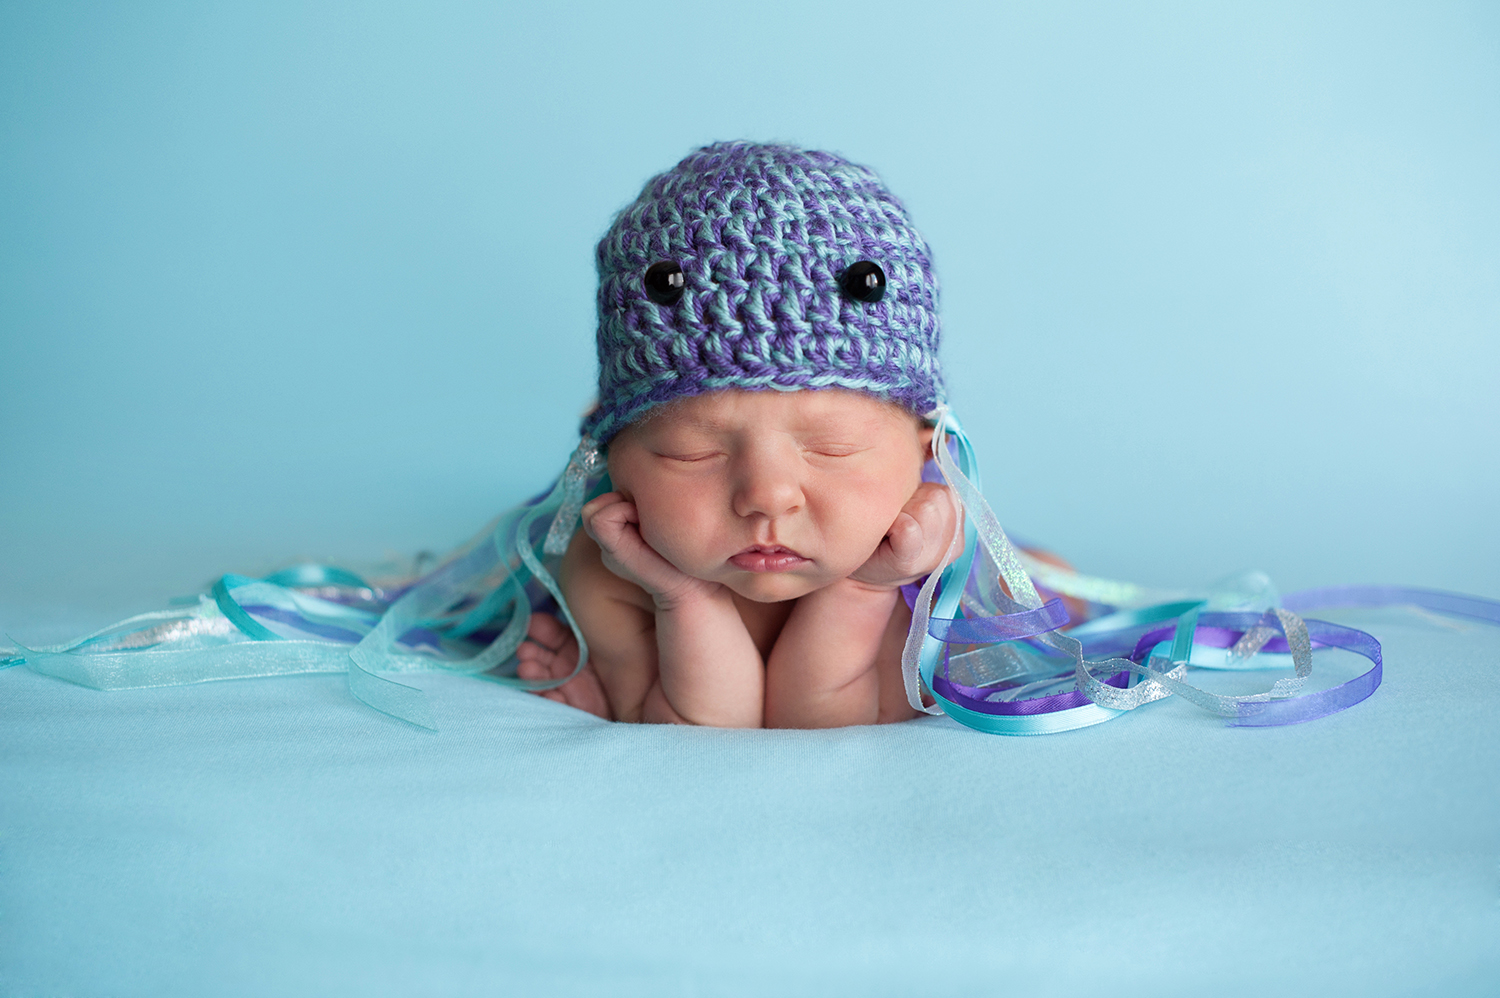 A sleeping newborn baby wearing a crocheted hat decorated as a jellyfish costume and one of the best ocean costumes for kids